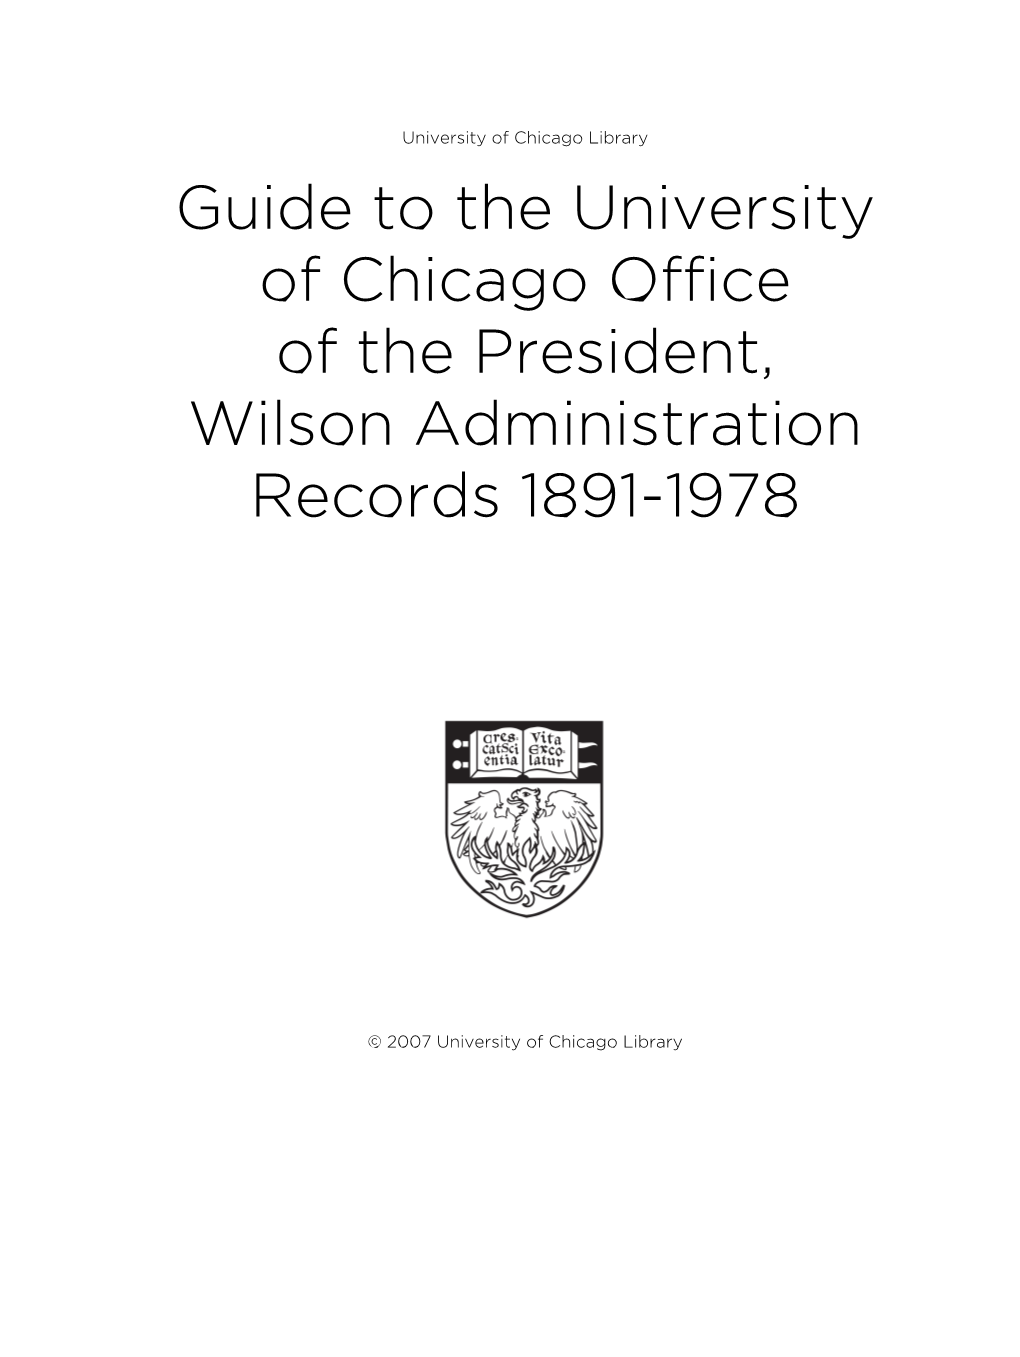 Guide to the University of Chicago Office of the President, Wilson Administration Records 1891-1978